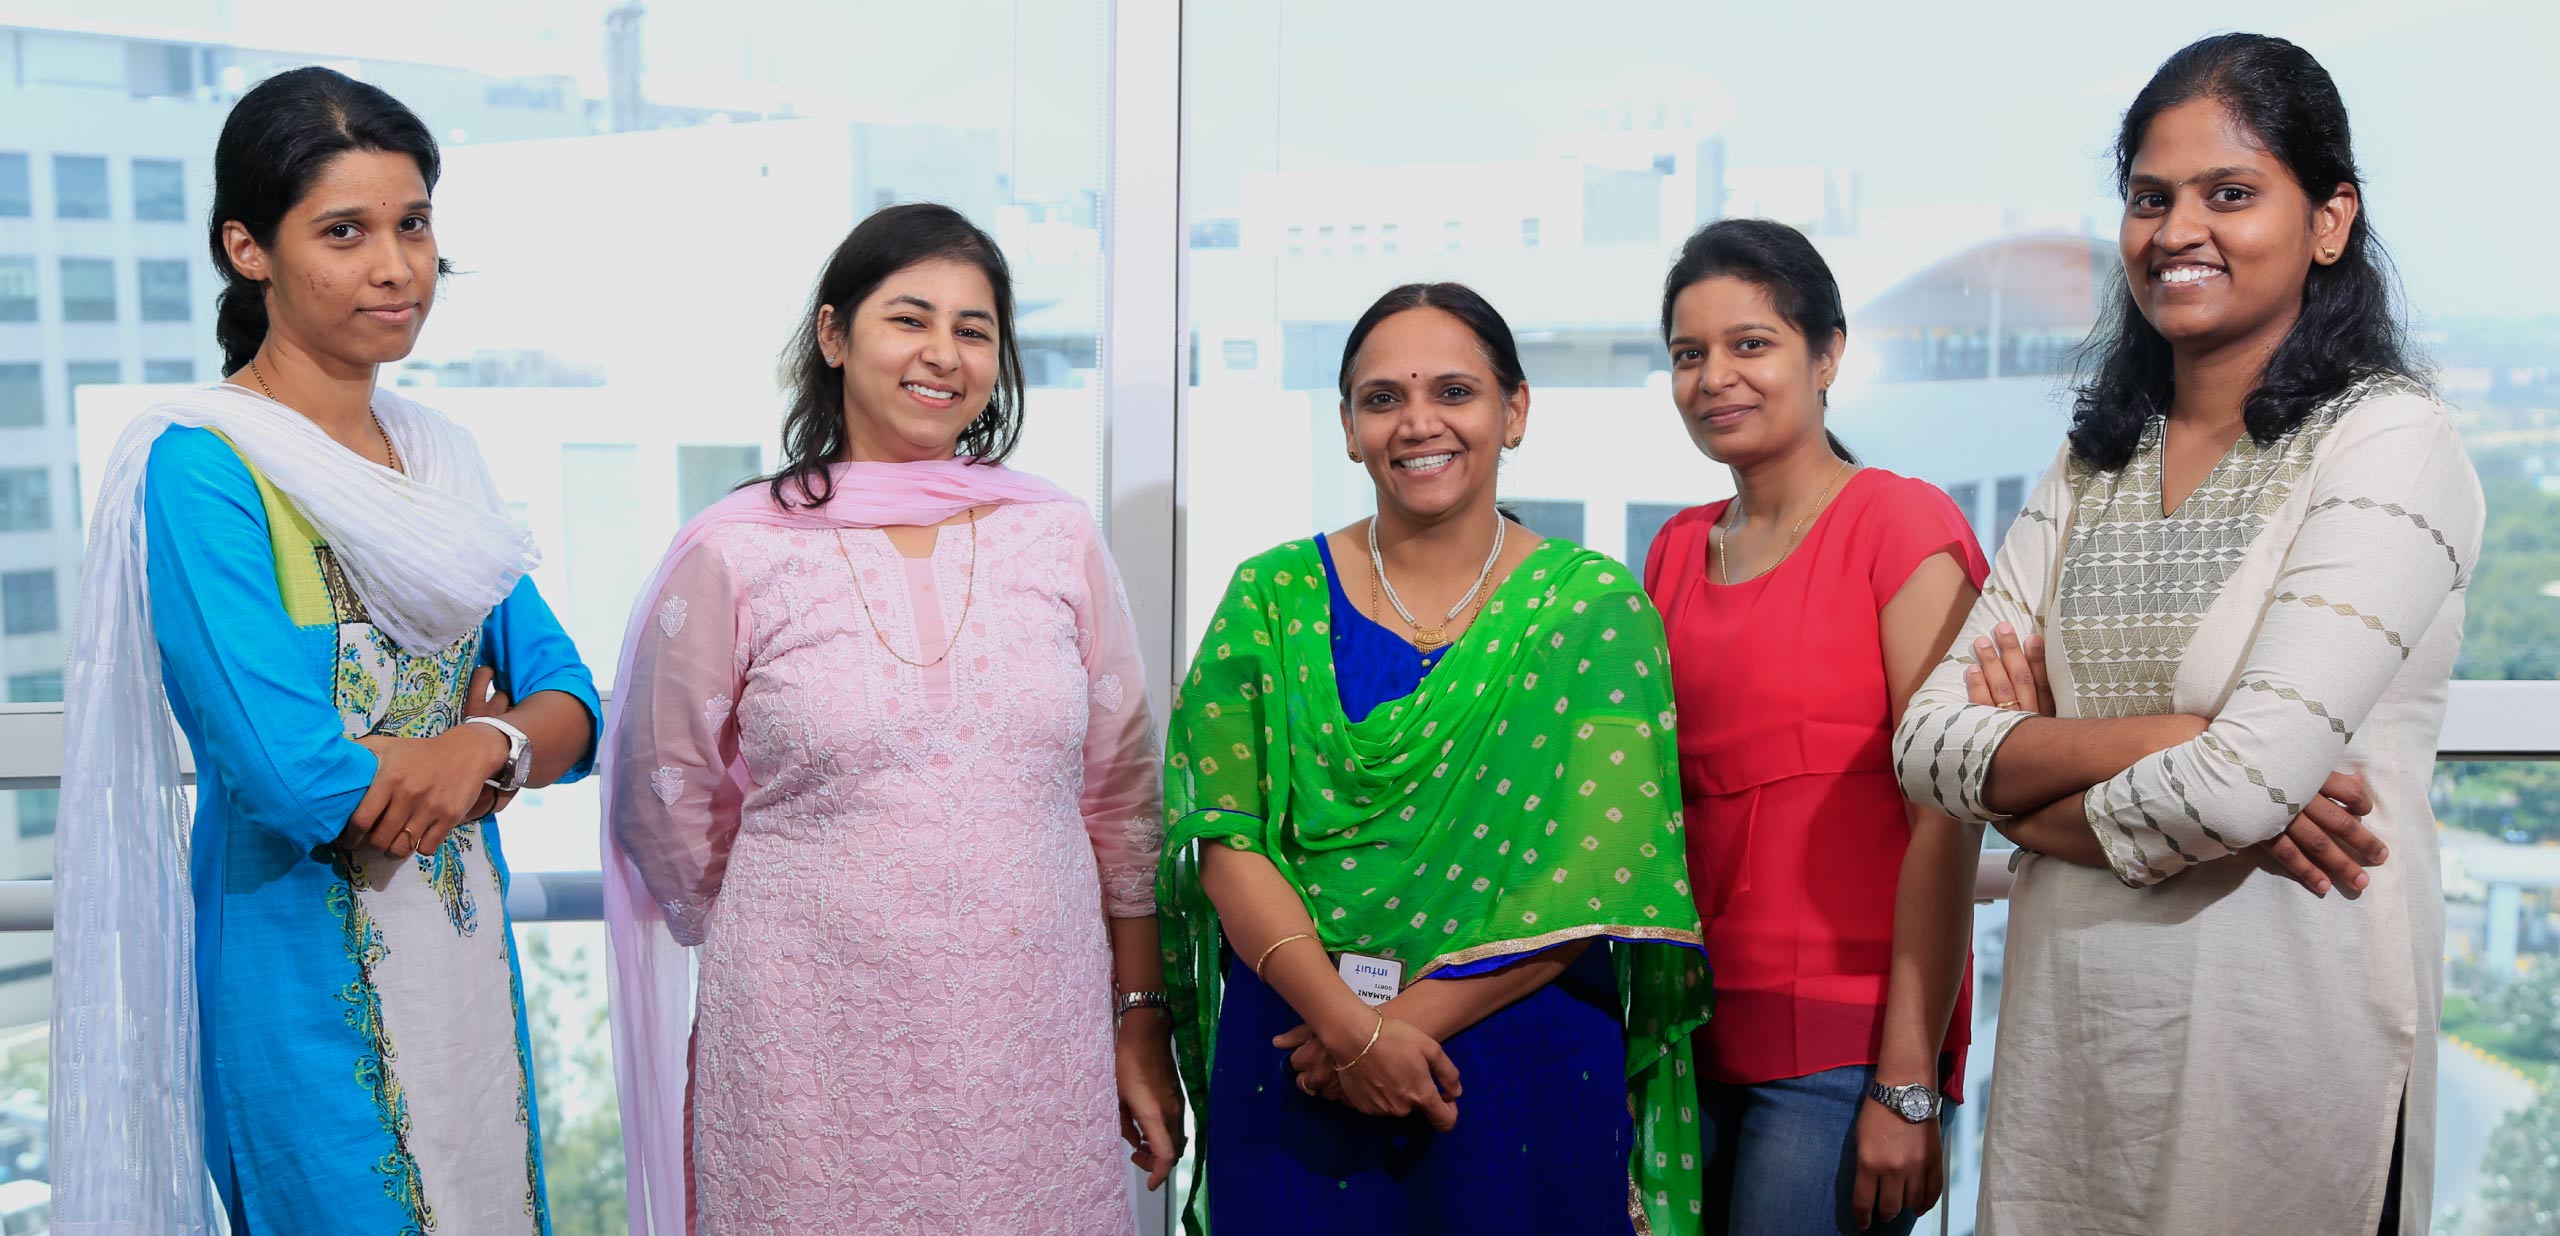 rediscovering-experienced-women-technologists-intuit-again-lata-agarwal